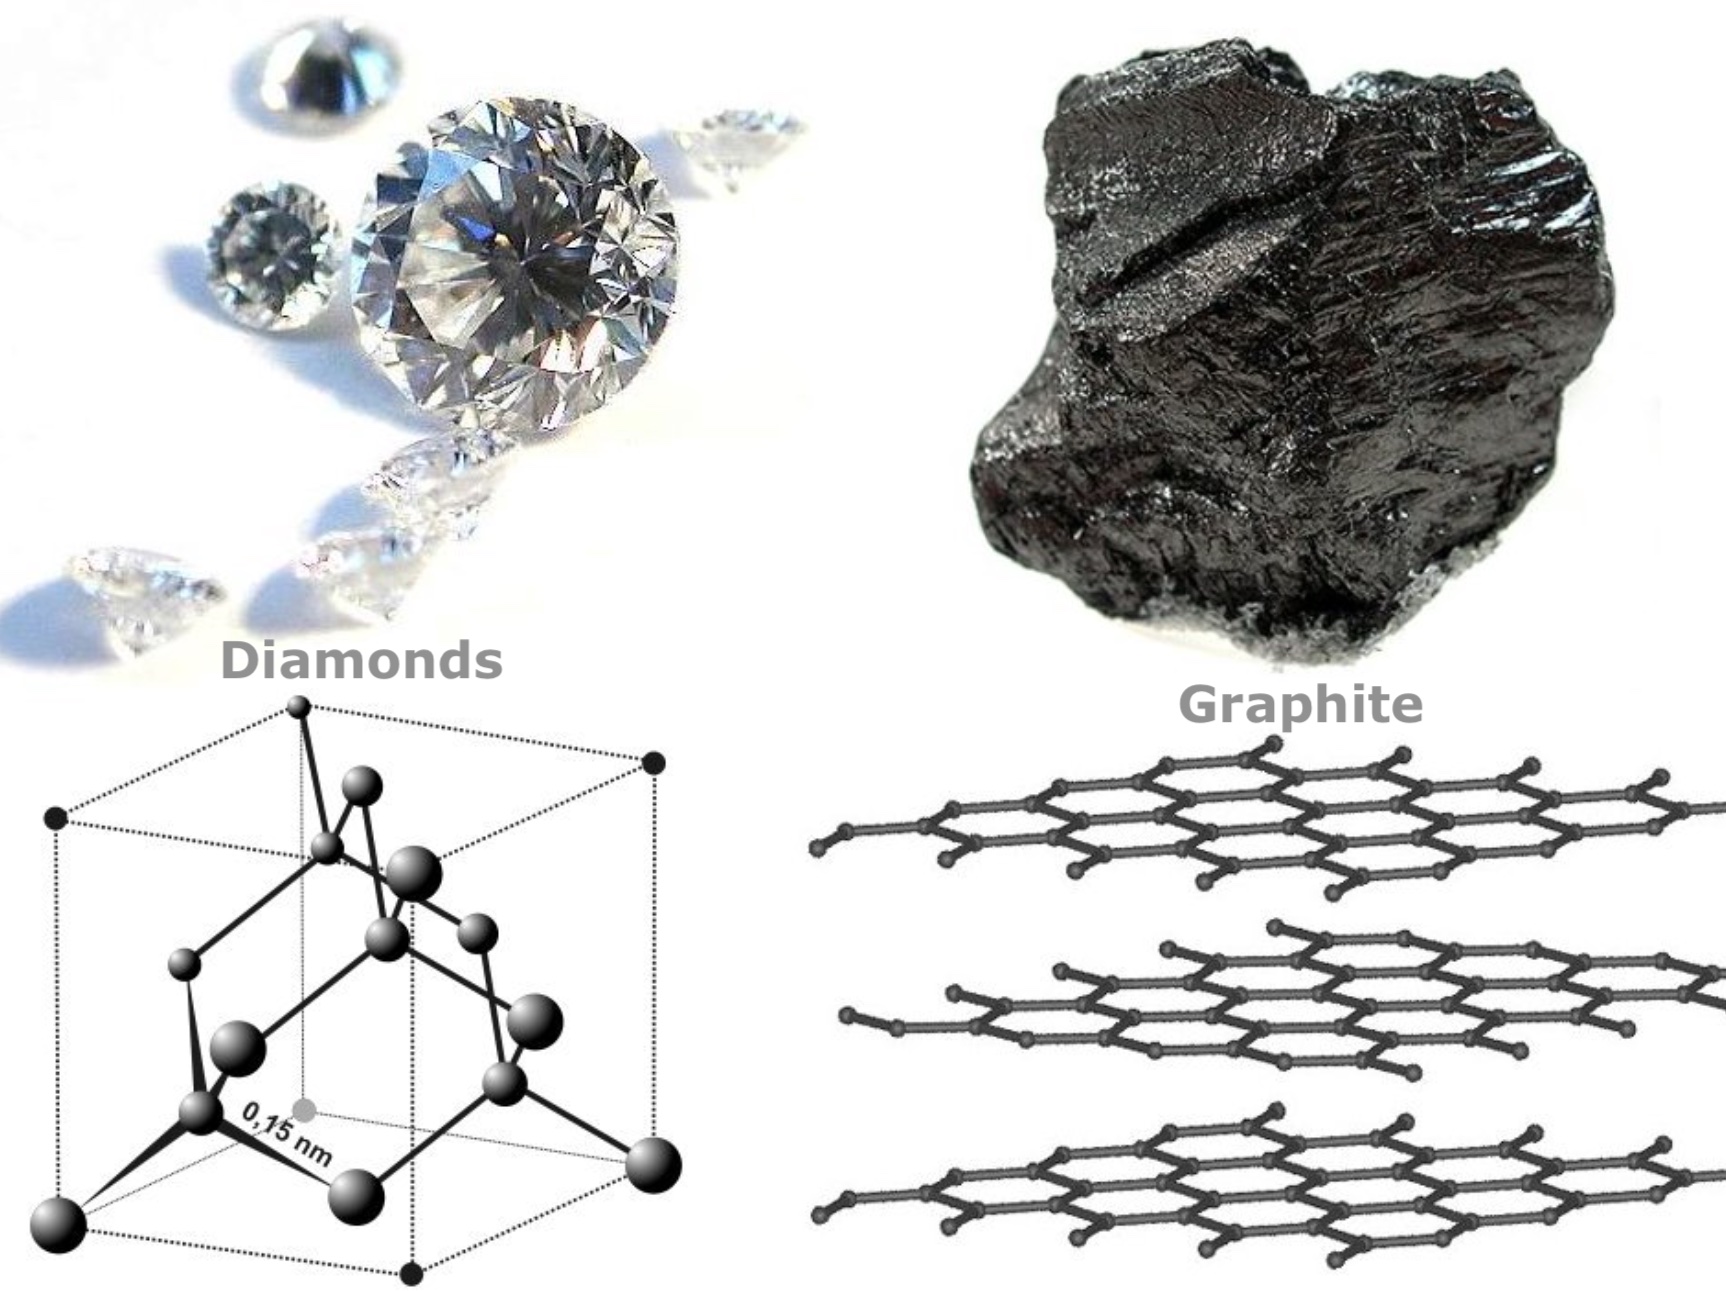 Chrystalline structure of diamonds and graphite